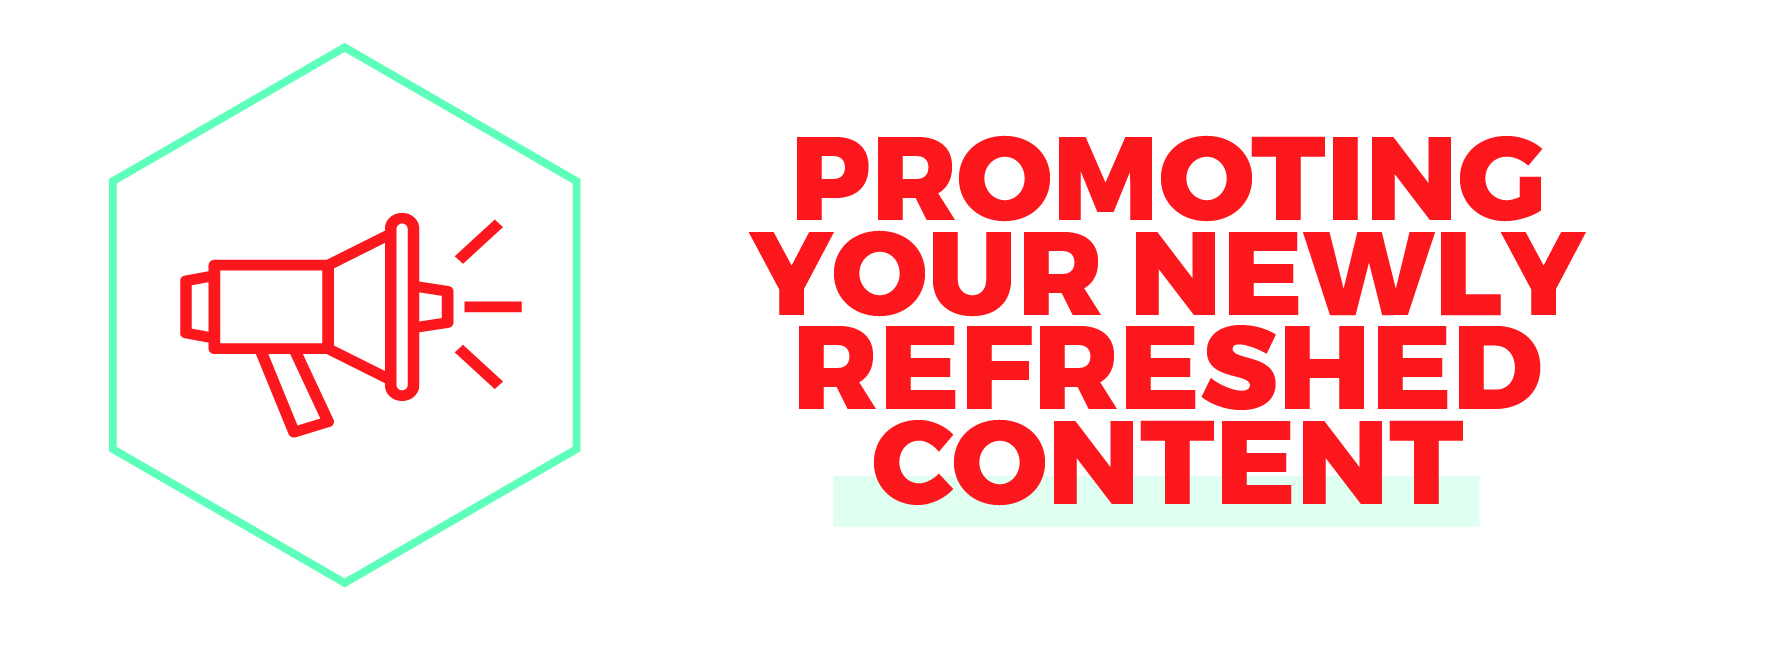 Promoting Your Newly Refreshed Content